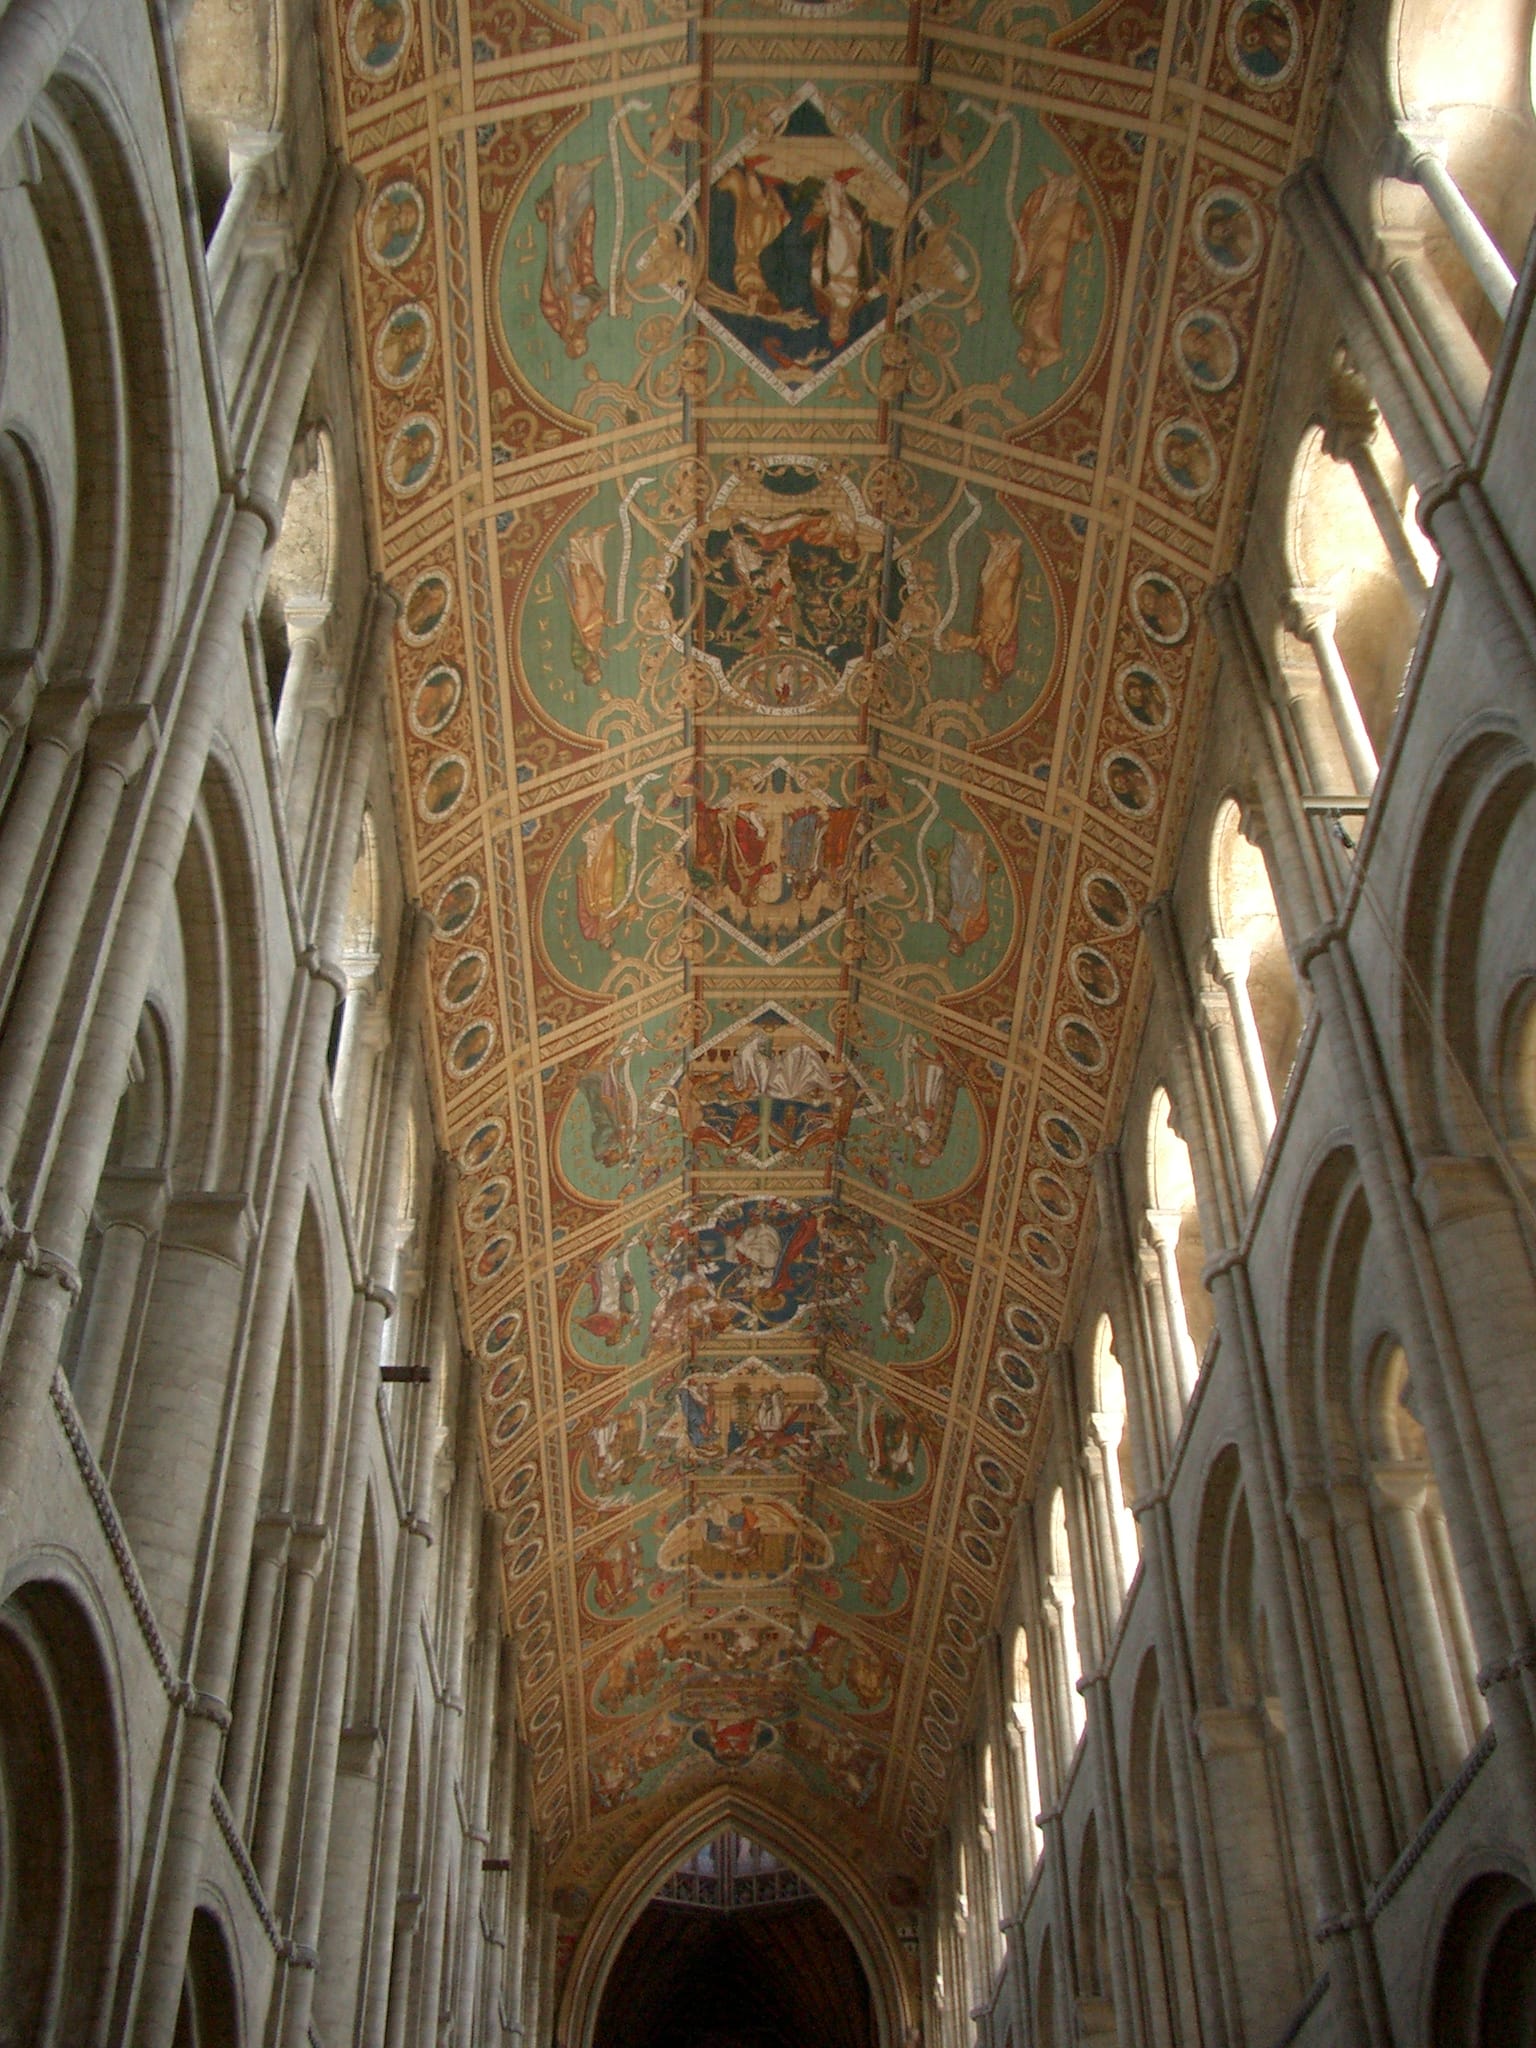 Nave Ceiling, Ely Cathedral Ely, England ©2006 GRevelstoke